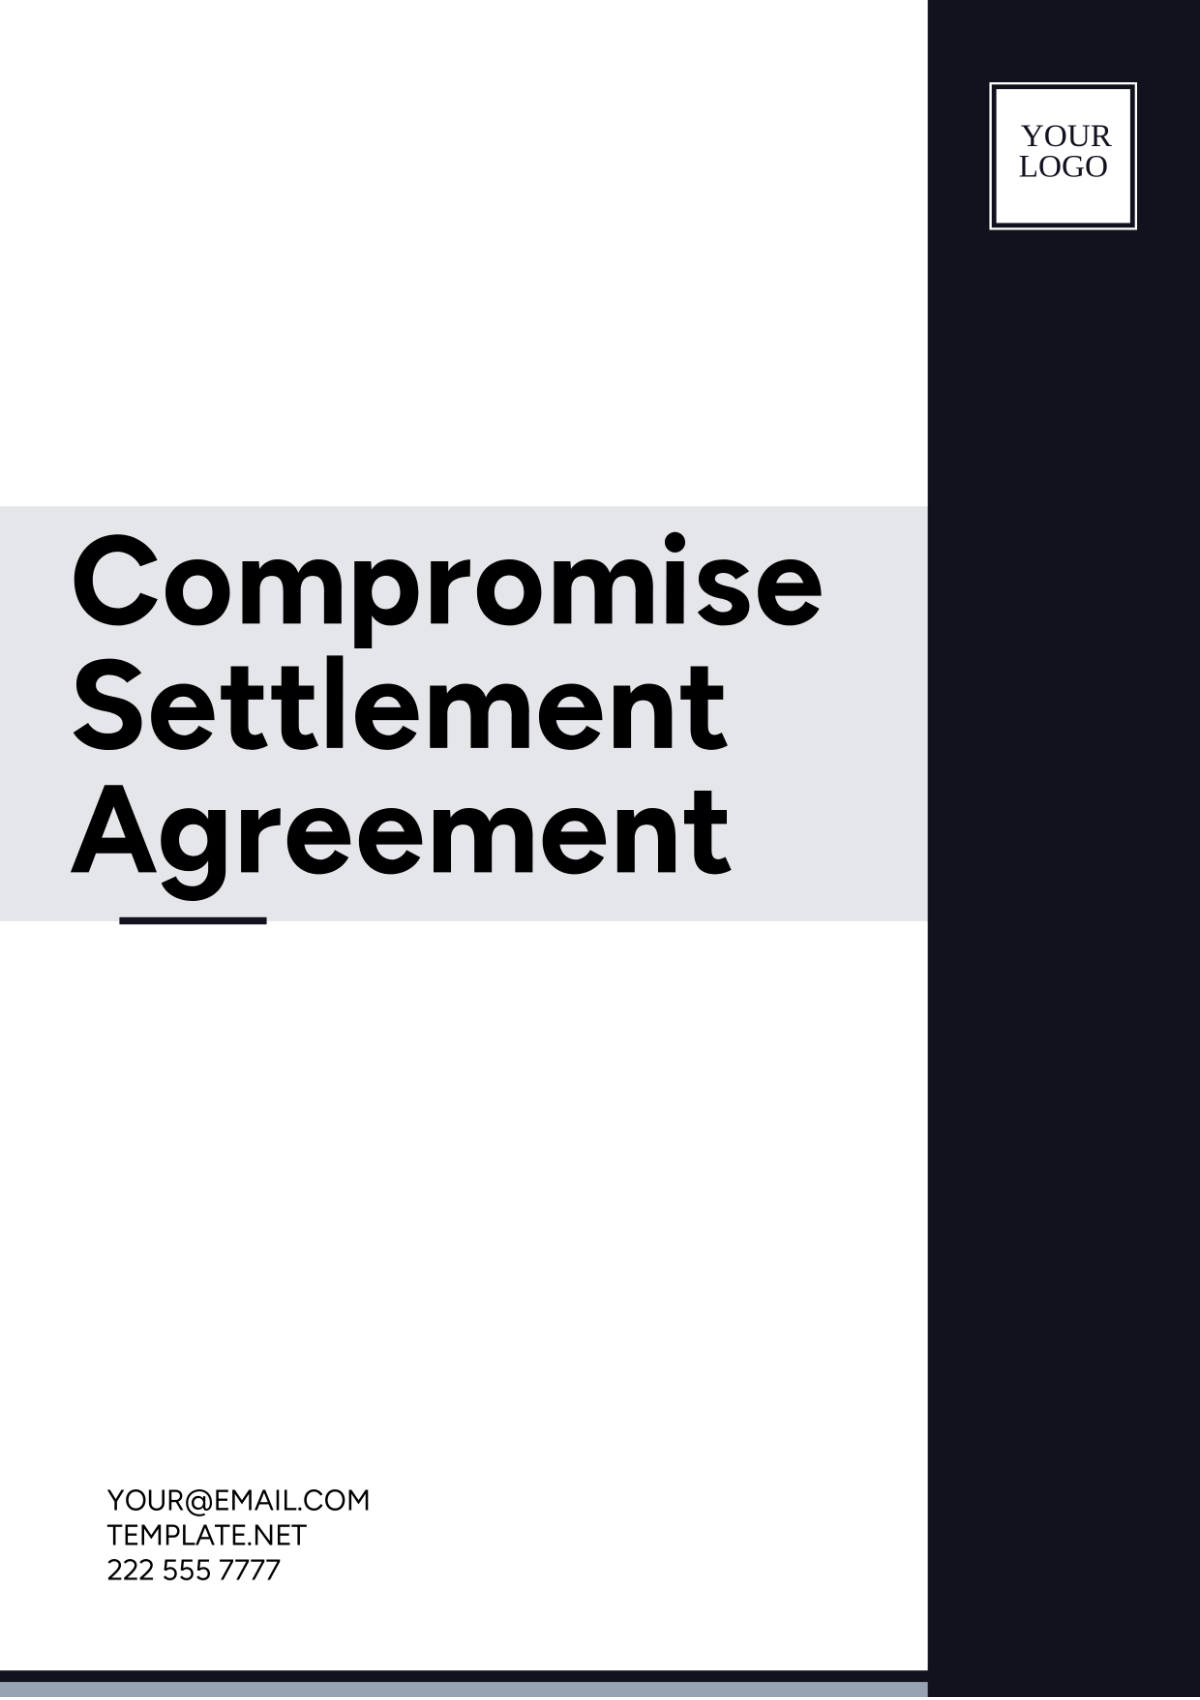 Free Compromise Settlement Agreement Template